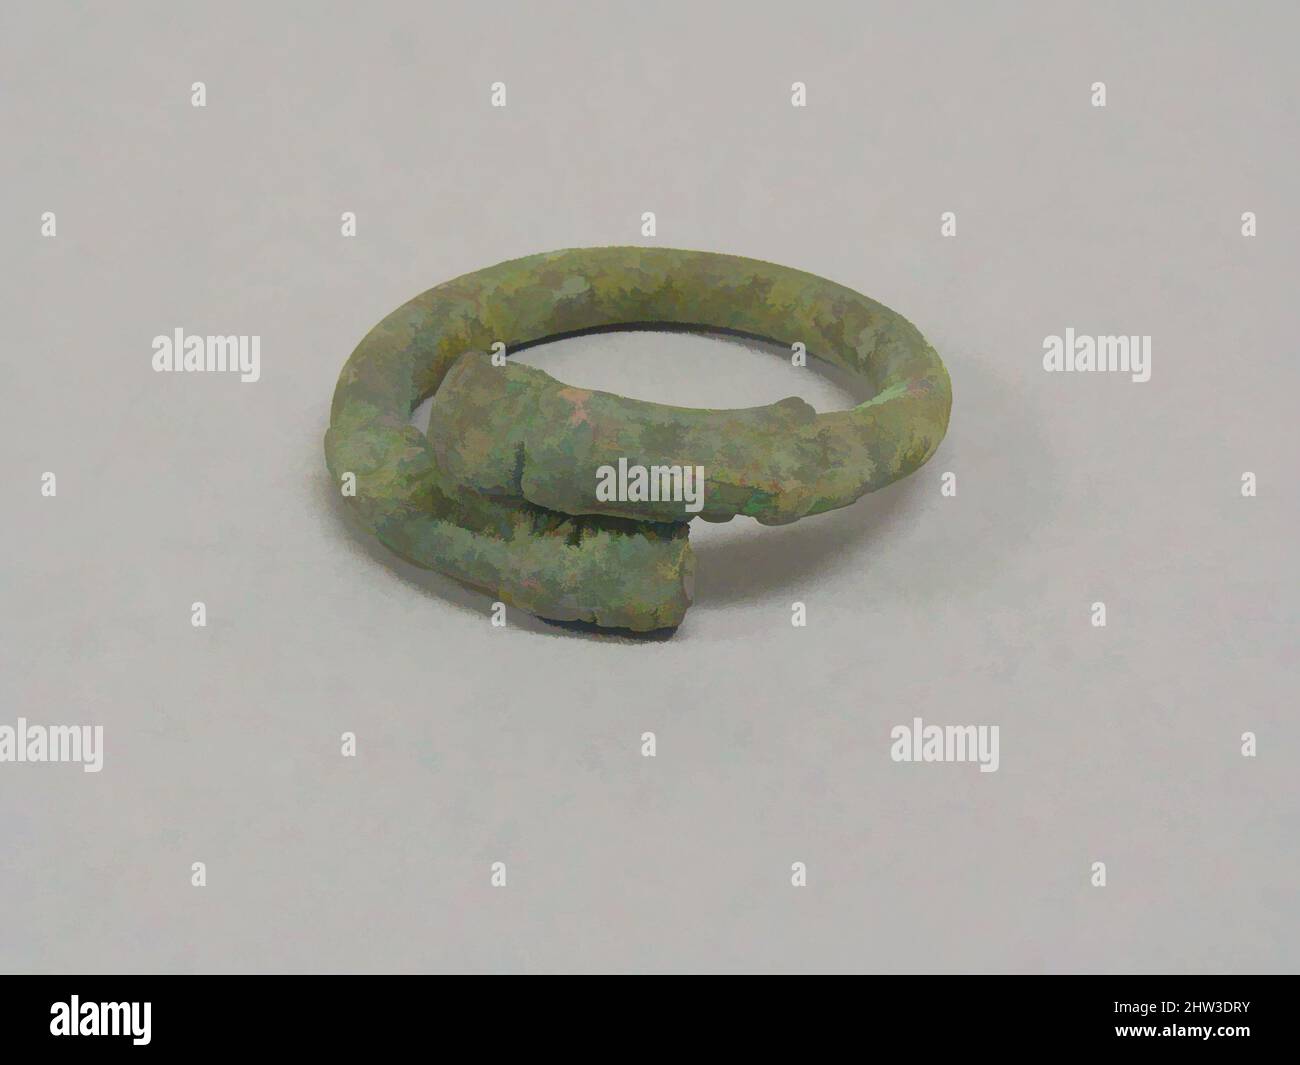 Art inspired by Overlapping Solid Bangle with Applied End Decoration, Middle–Late period, 1000 B.C.–A.D. 400, Thailand, Bronze, W. 2 1/4 in. (5.7 cm); D. 2 1/8 in. (5.4 cm), Jewelry, Classic works modernized by Artotop with a splash of modernity. Shapes, color and value, eye-catching visual impact on art. Emotions through freedom of artworks in a contemporary way. A timeless message pursuing a wildly creative new direction. Artists turning to the digital medium and creating the Artotop NFT Stock Photo